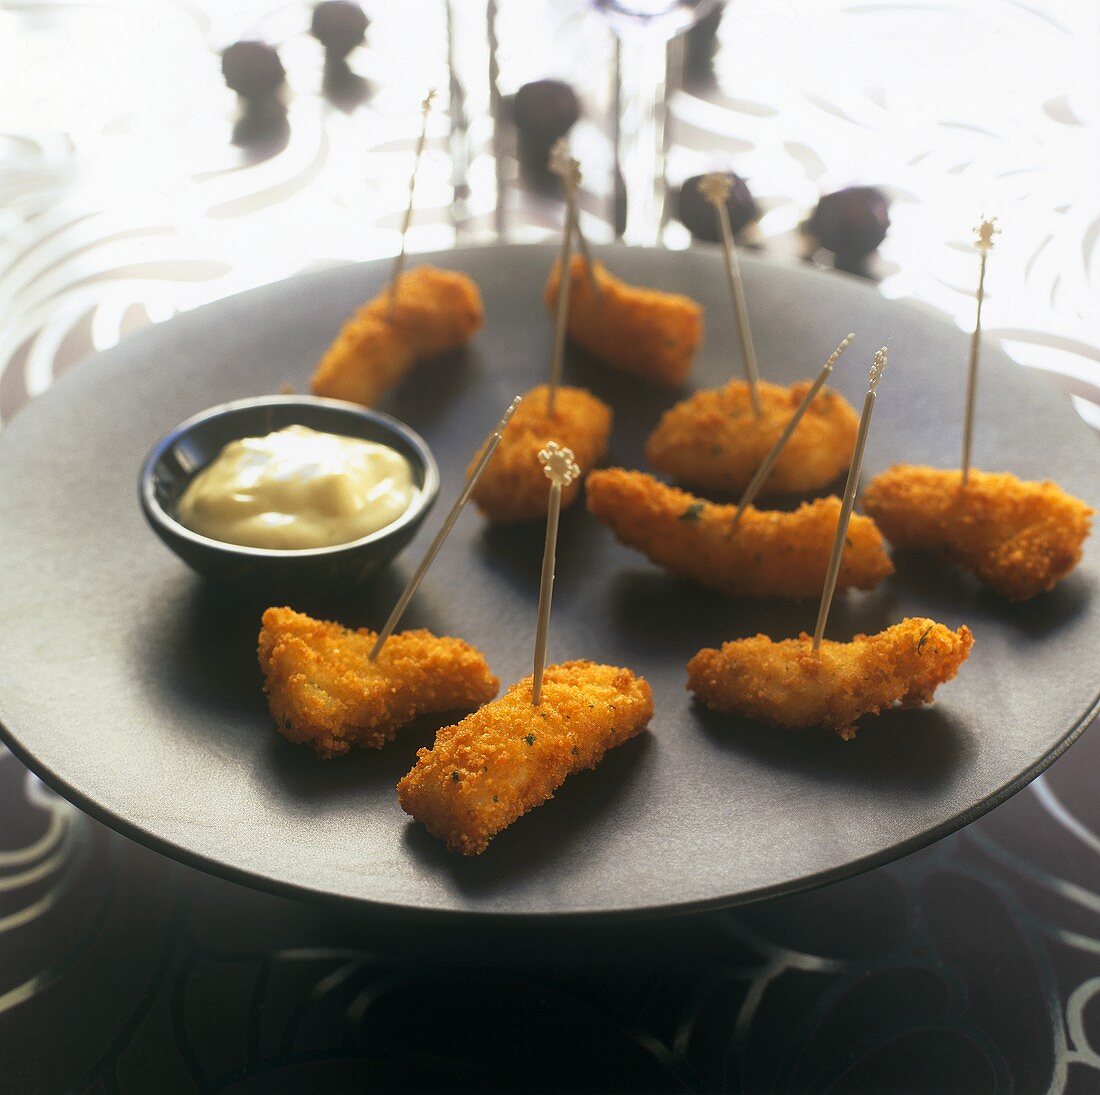 Breaded cod strips with tartare sauce